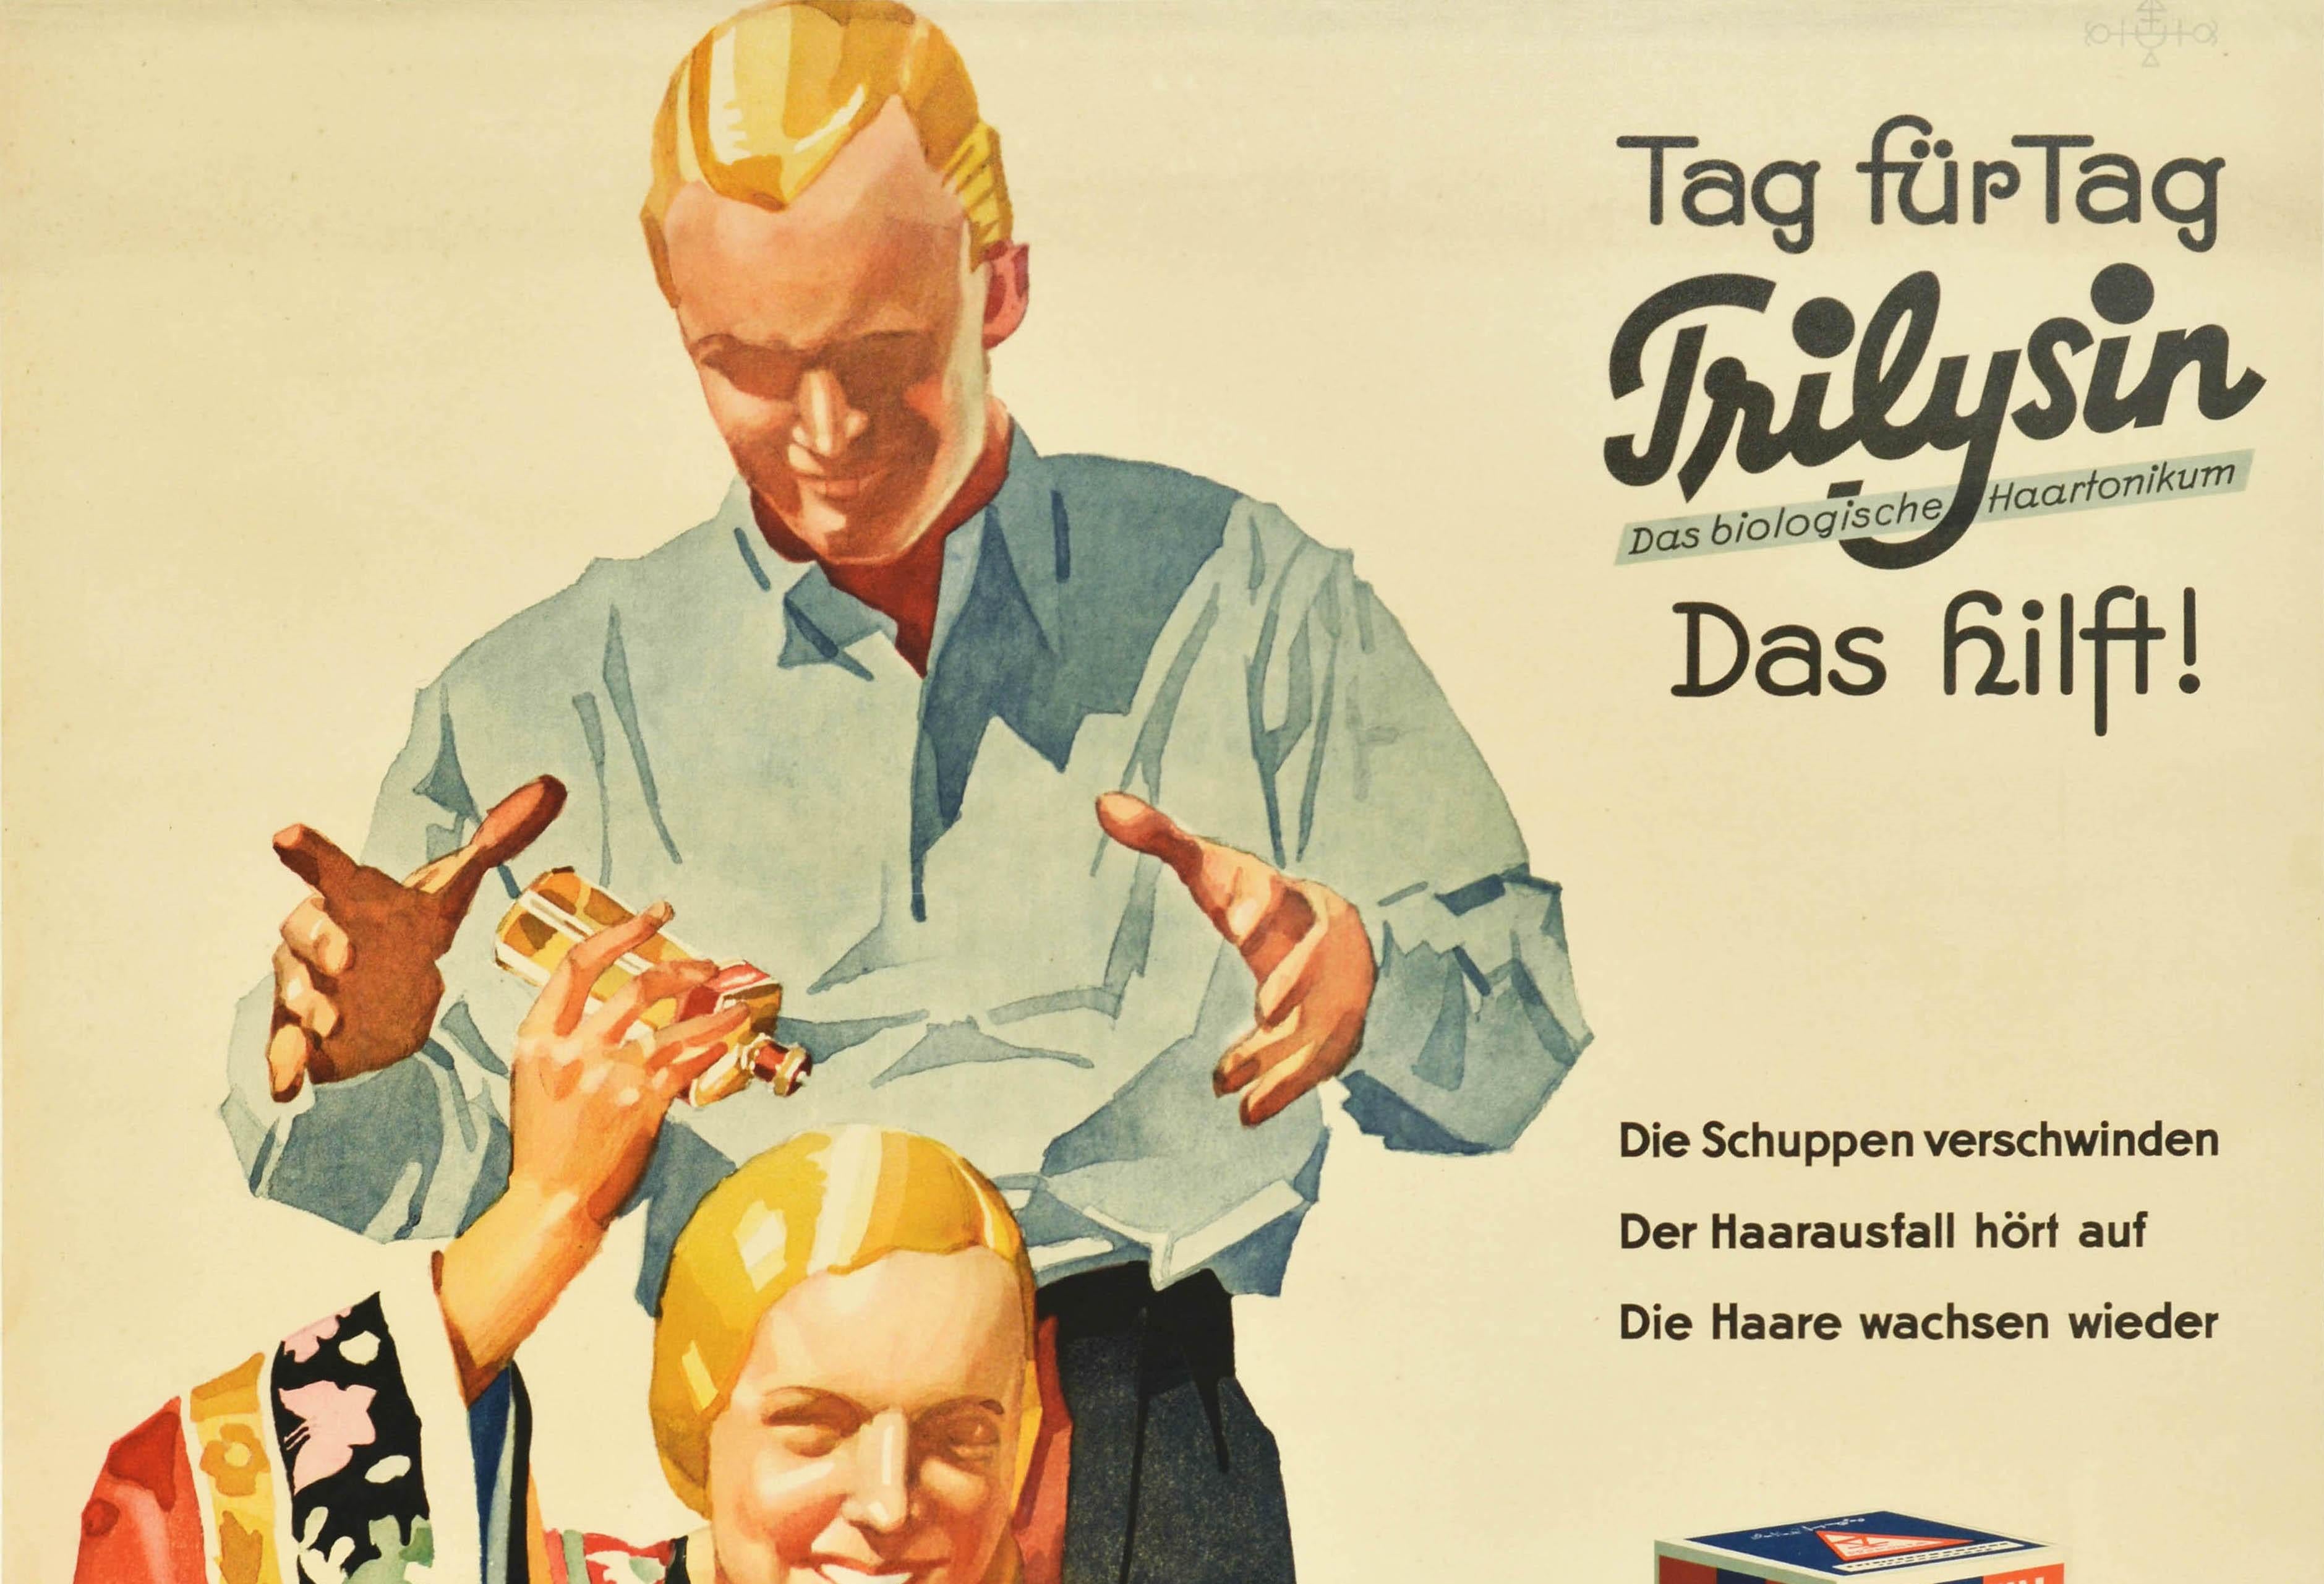 Original vintage advertising poster - Day after day Trilysin The biological hair tonic that helps! The dandruff disappears The hair loss stops The hair grows again. Scientific hair care with Trilysin and Trilysin Oil - featuring a great design by